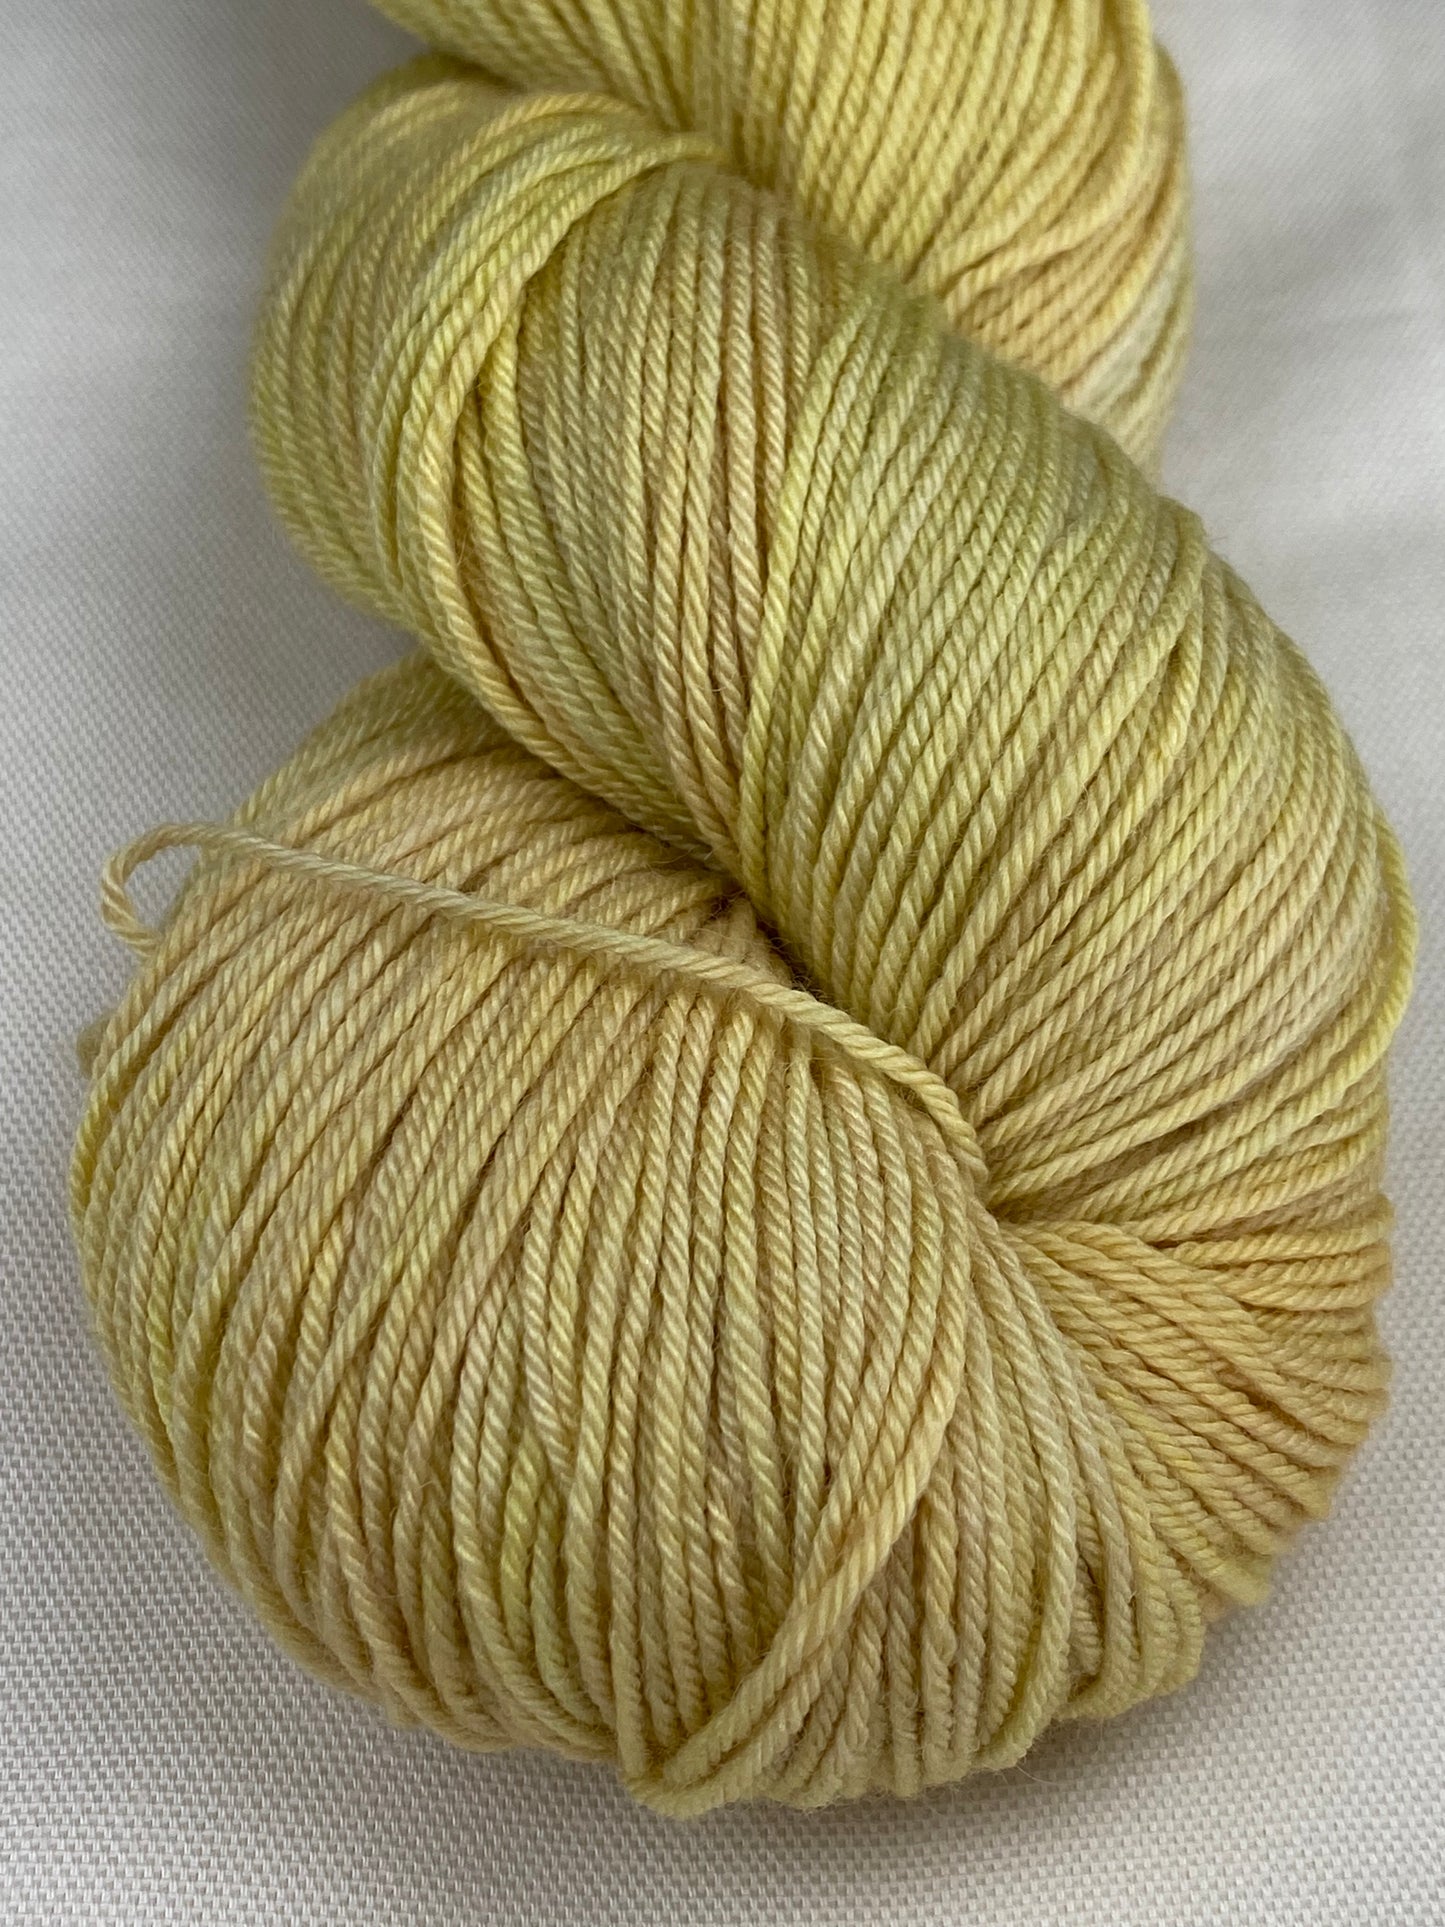 Royal Select Fingering Weight
/ First Light